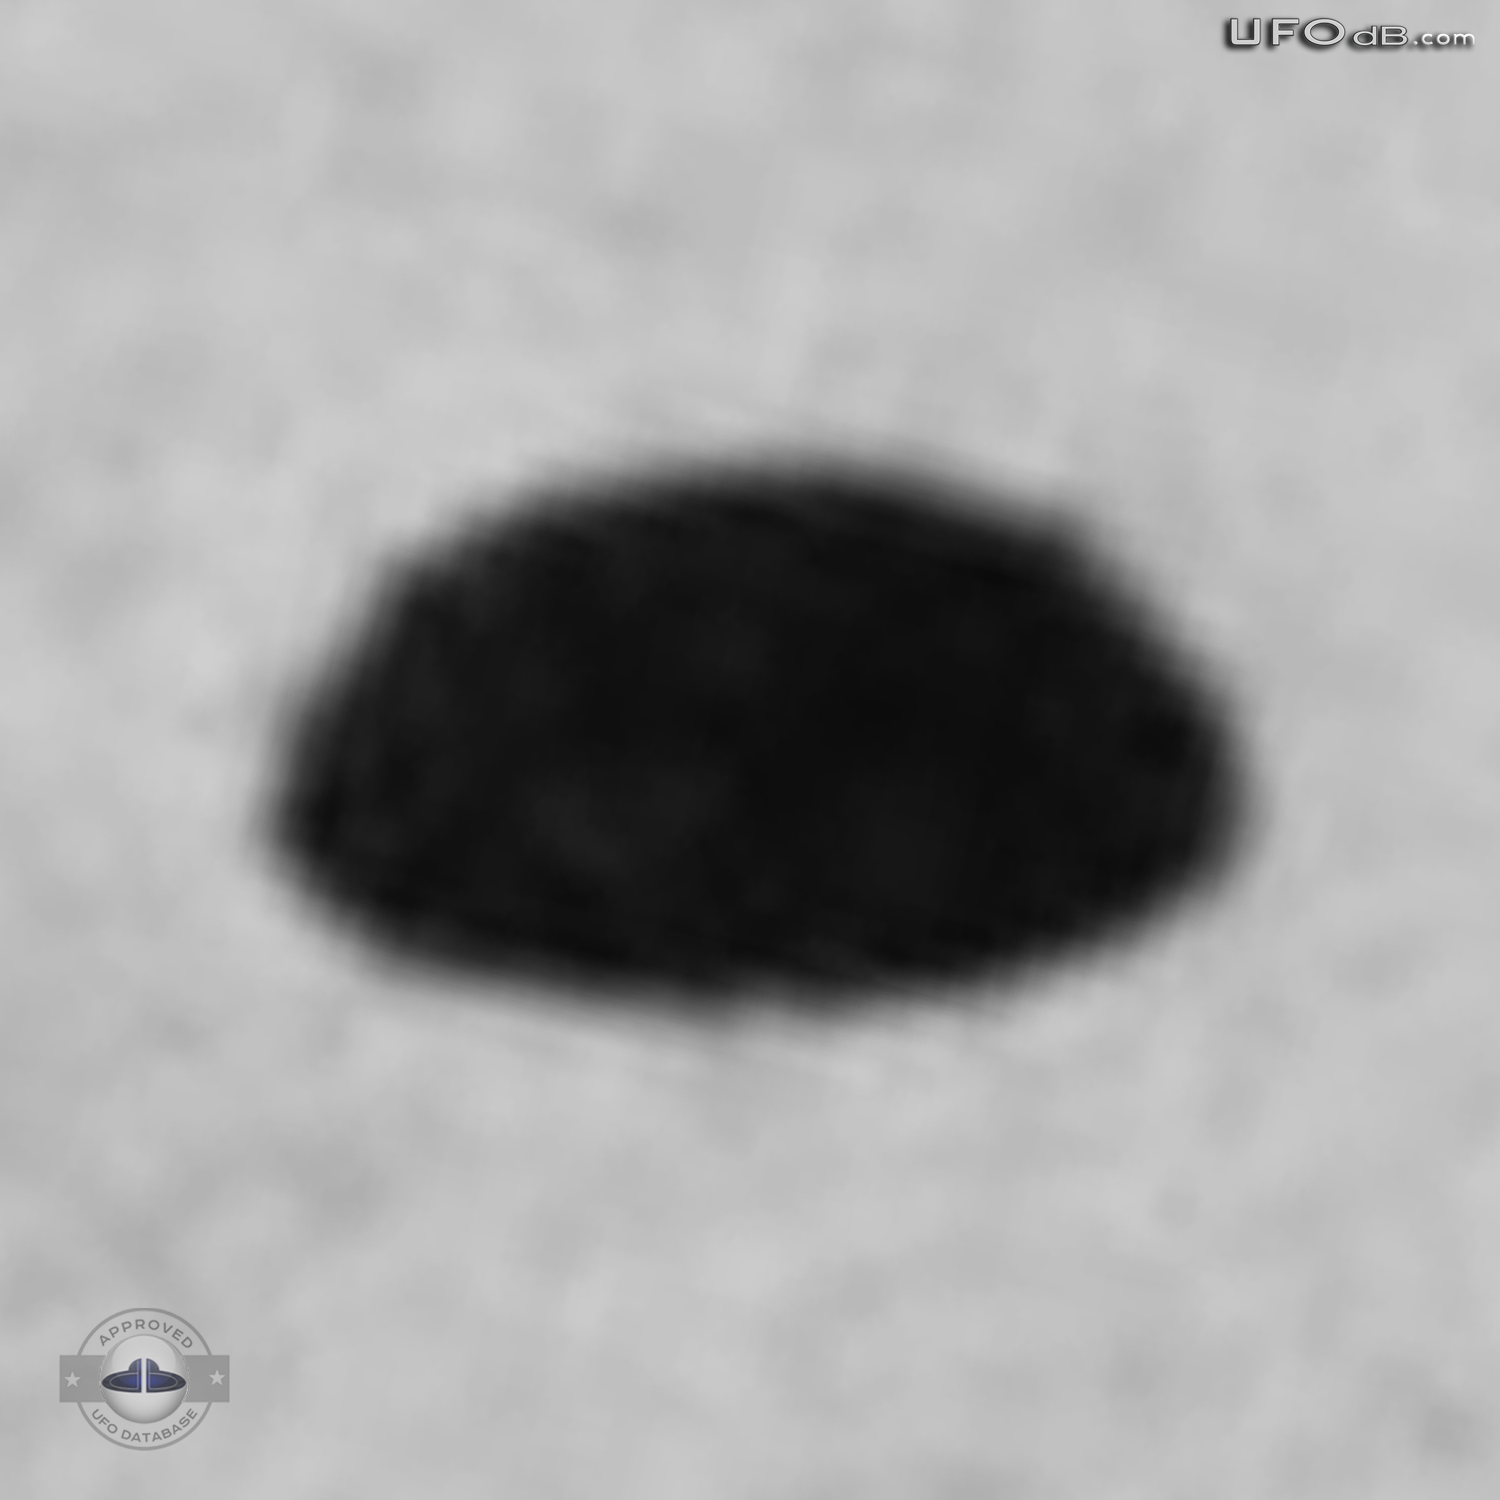 Japan University student shoot picture of UFO passing over his house UFO Picture #353-5